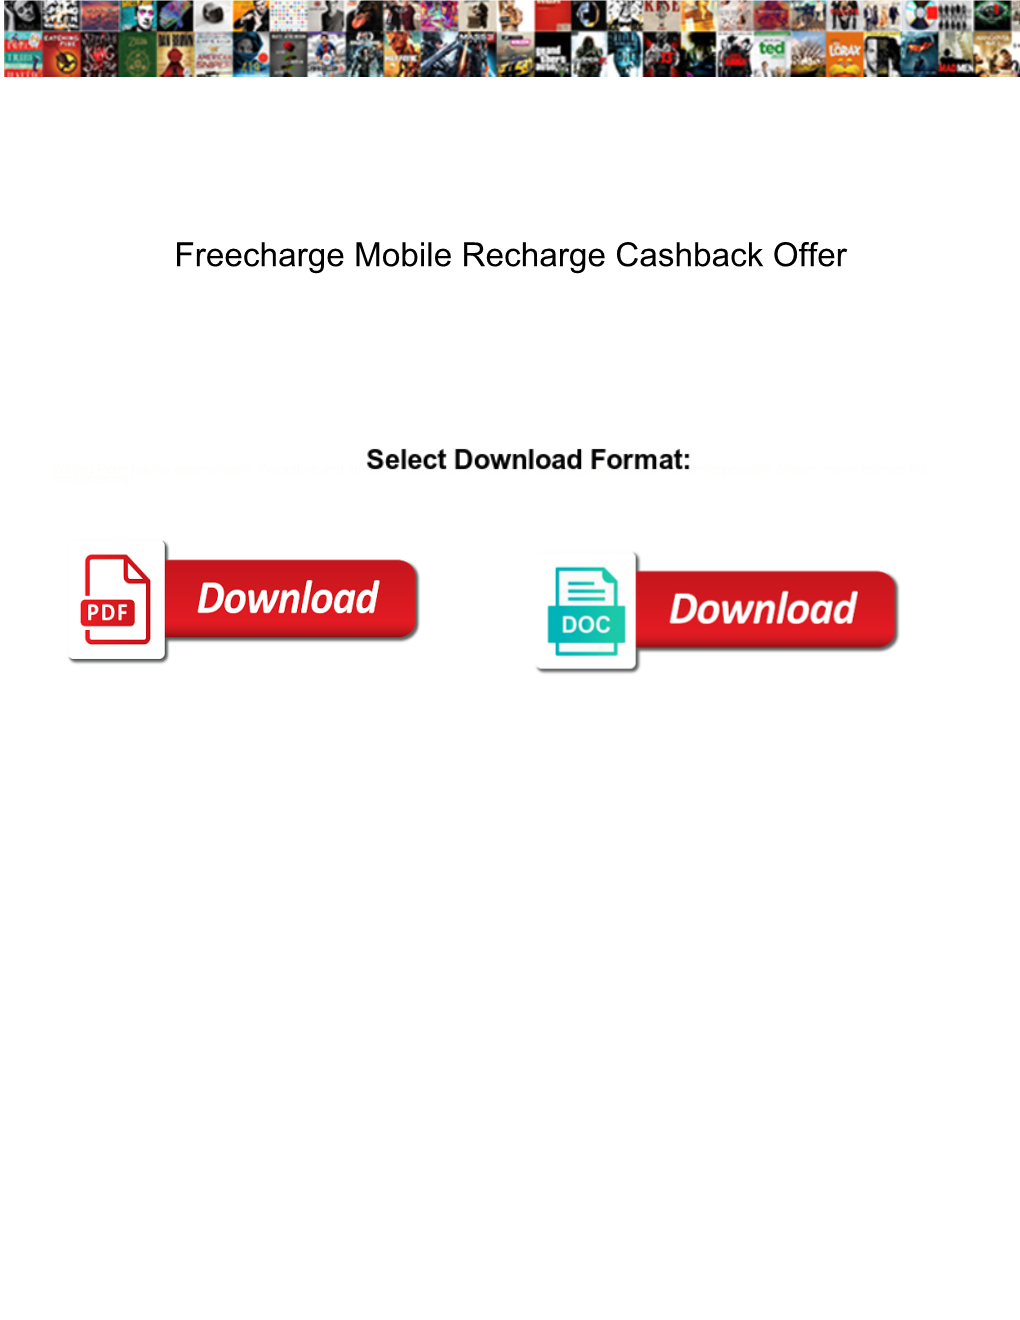 Freecharge Mobile Recharge Cashback Offer